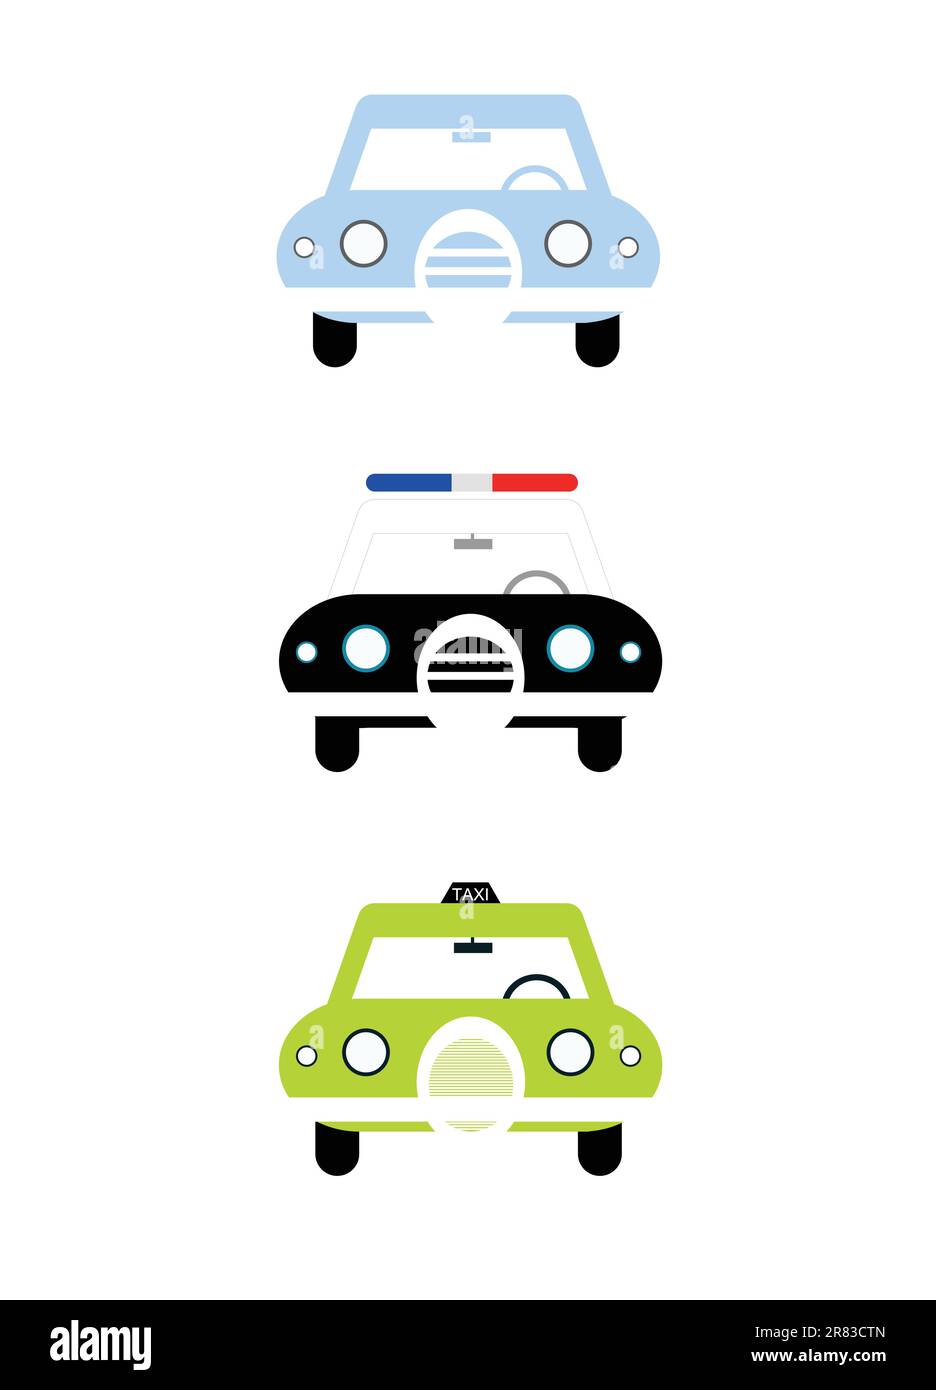 City cars front view illustration isolated on white background. Civil car, police and taxi cab. Cartoon style simple colorful vector illustration. Stock Vector